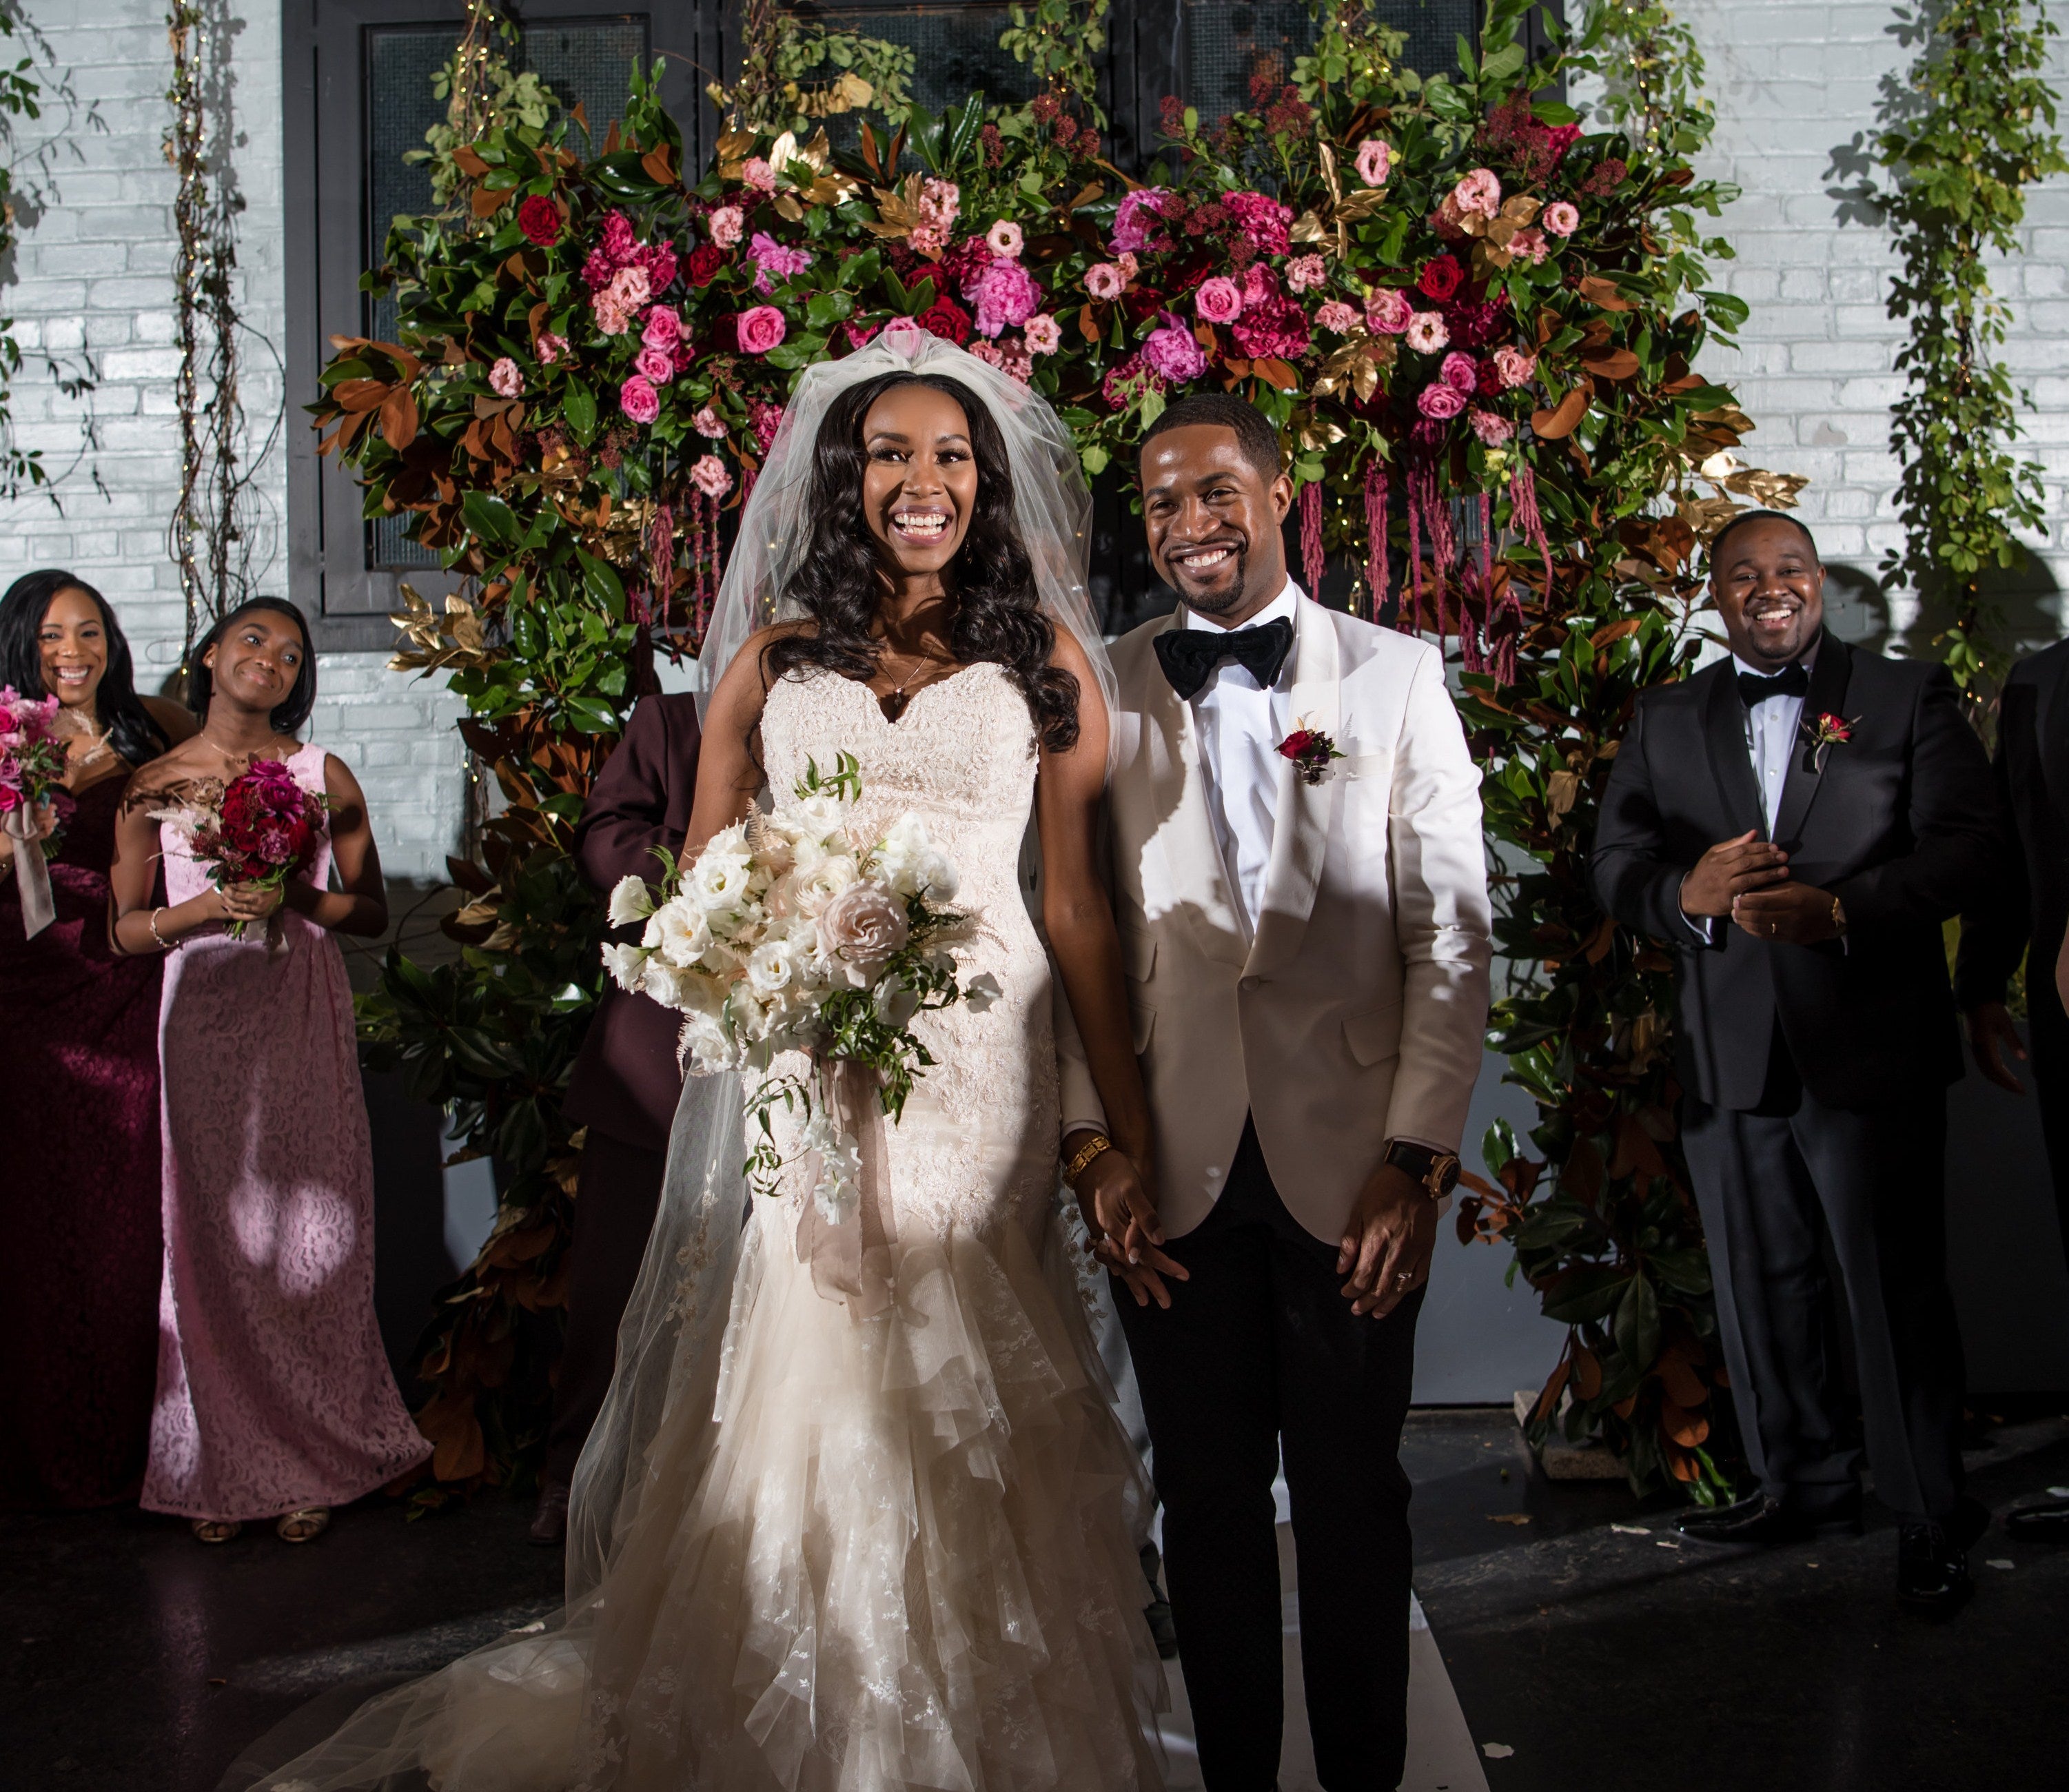 Bridal Bliss: Omari and Shadeen's New York Wedding Was Filled With Classic Romance Vibes
